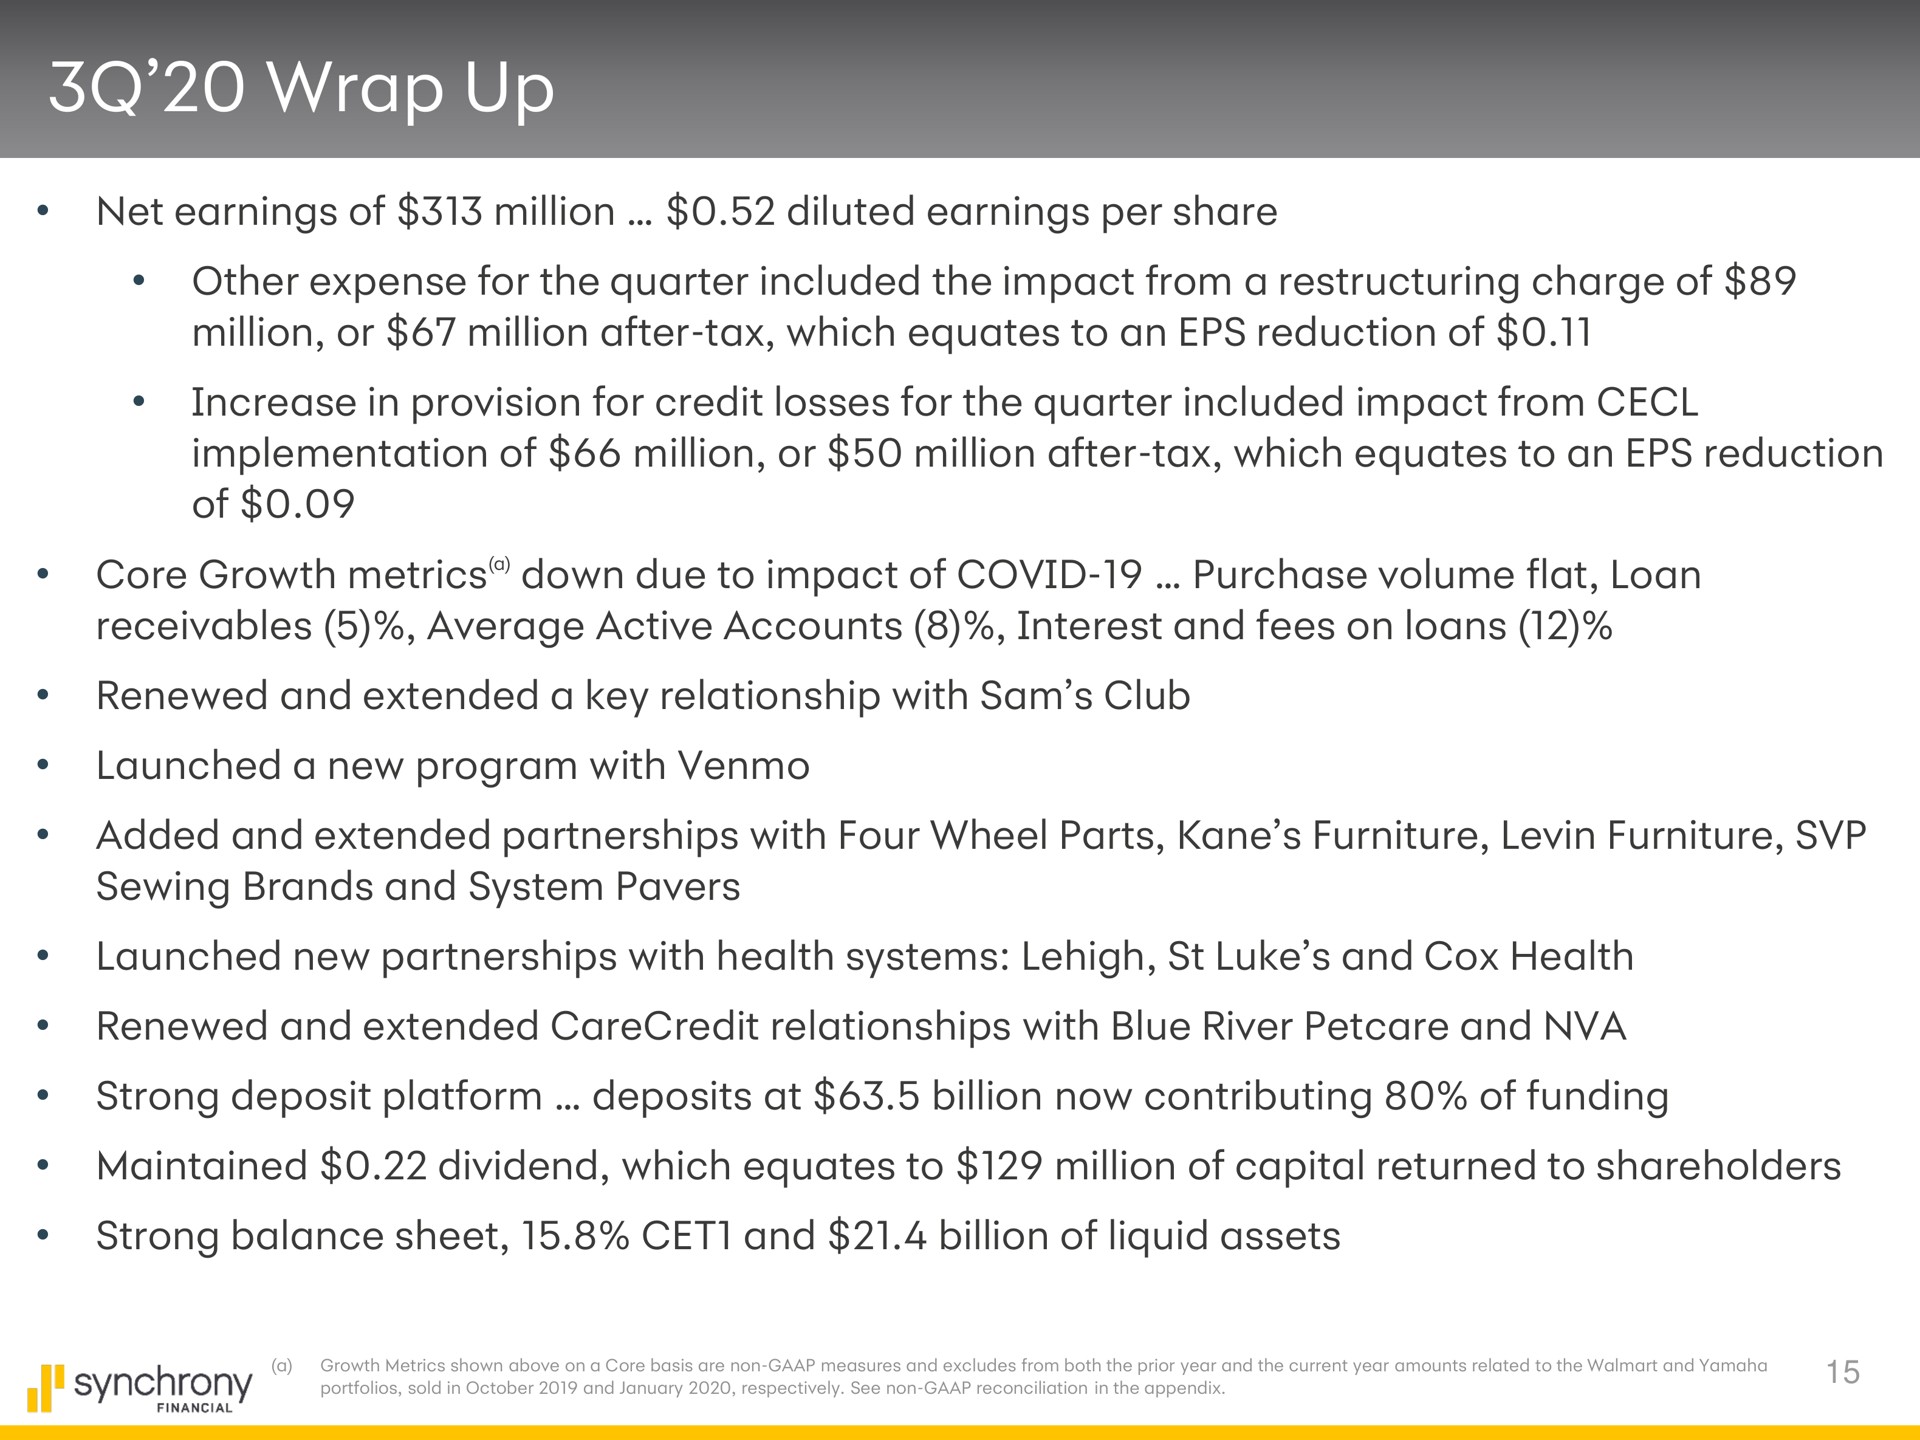 wrap up growth metrics shown above on a core basis are non measures and excludes from both the prior year and the current year amounts related and | Synchrony Financial